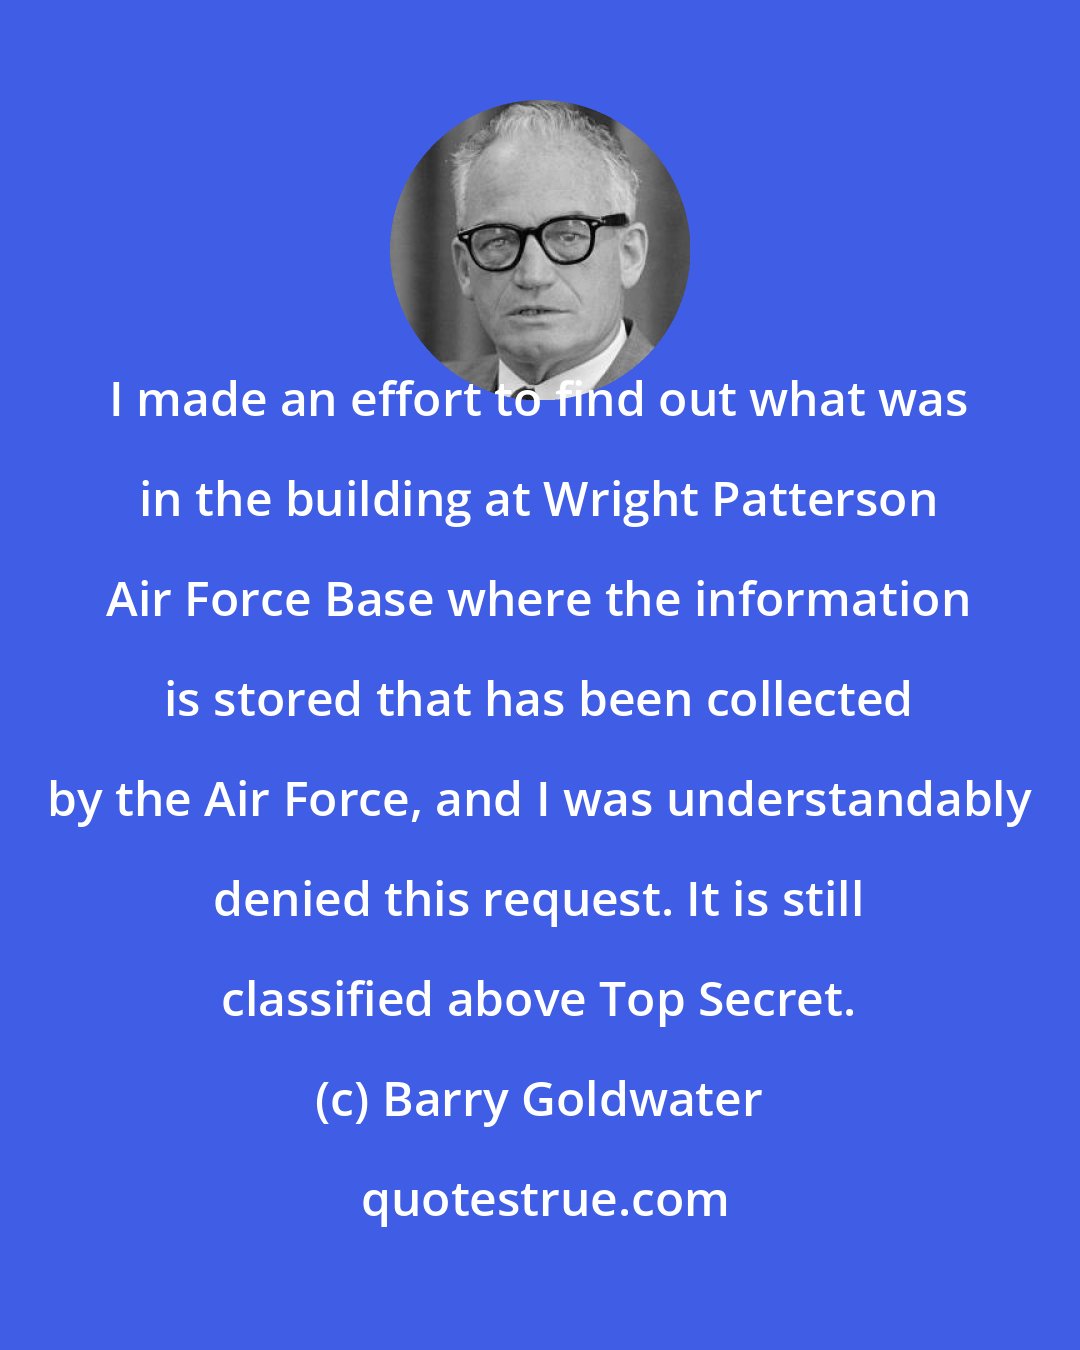 Barry Goldwater: I made an effort to find out what was in the building at Wright Patterson Air Force Base where the information is stored that has been collected by the Air Force, and I was understandably denied this request. It is still classified above Top Secret.